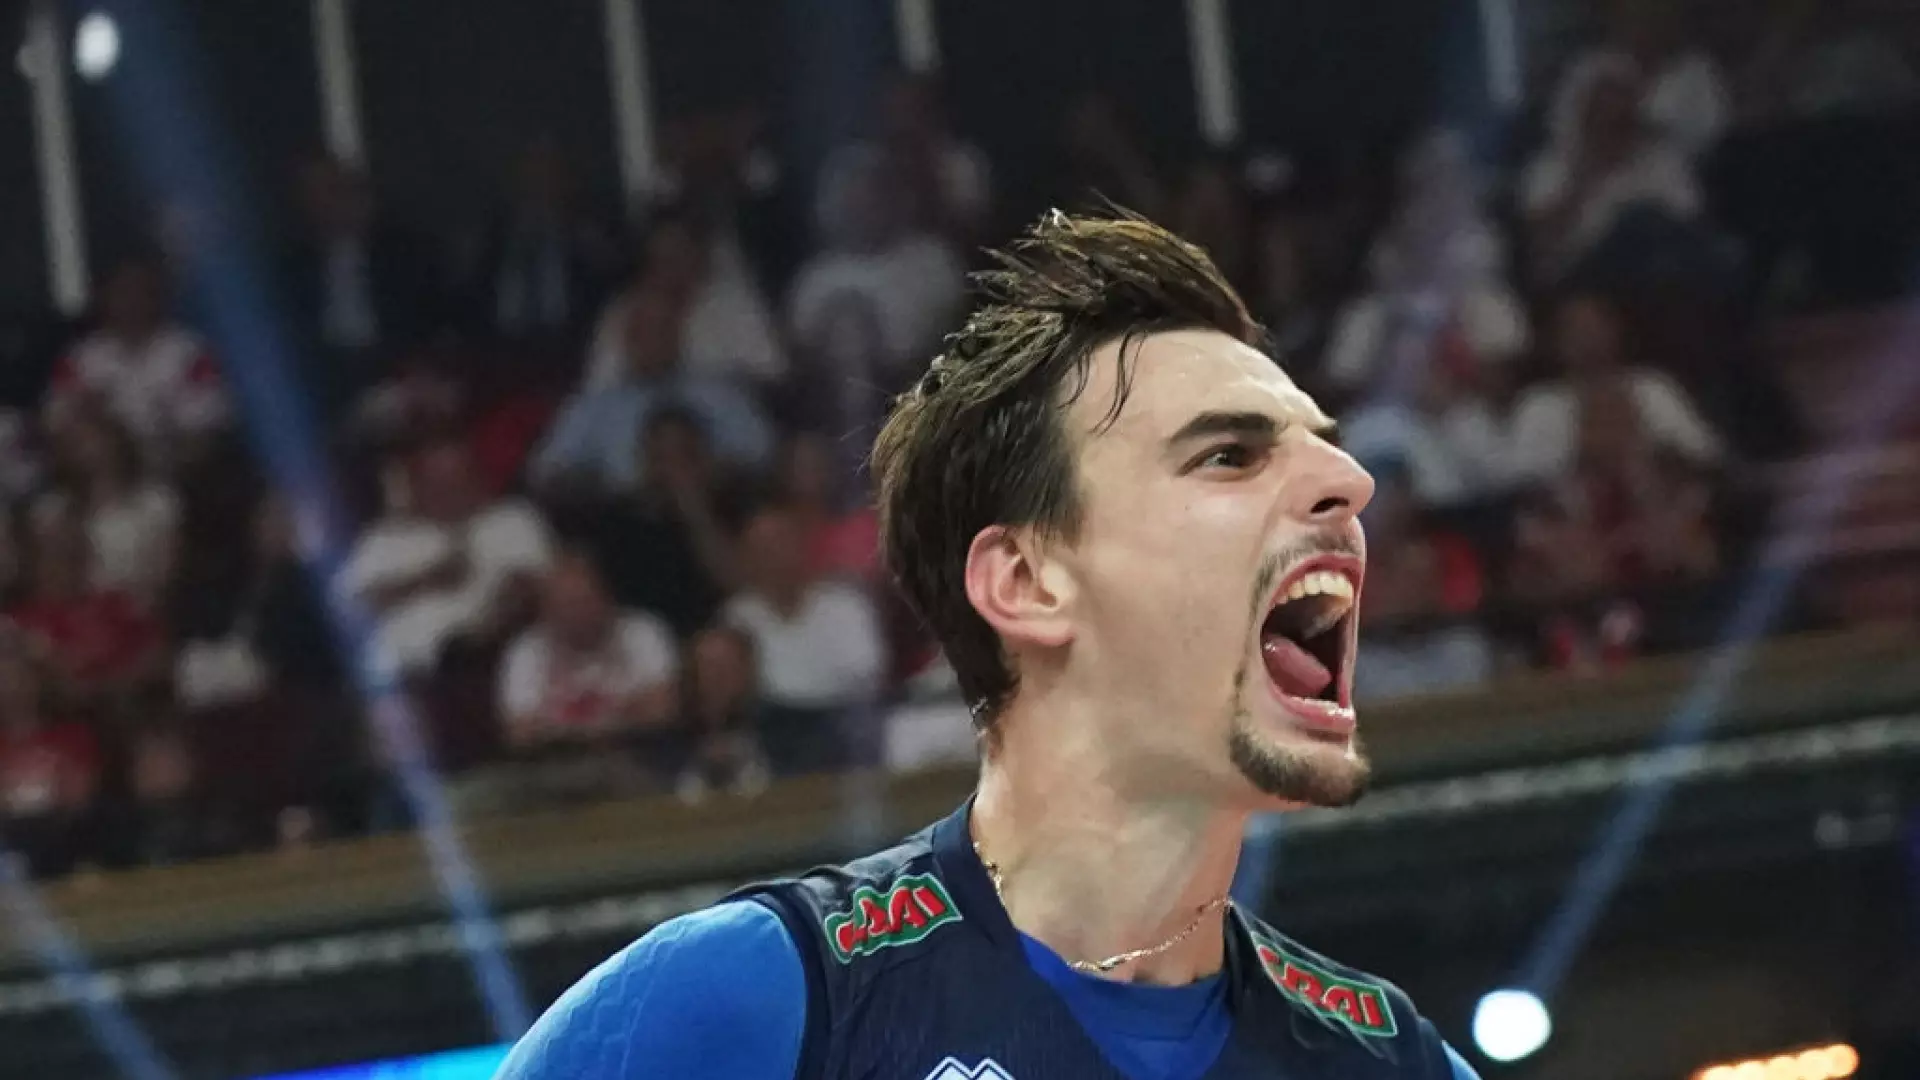 L’Itavolley cala il tris in Nations League